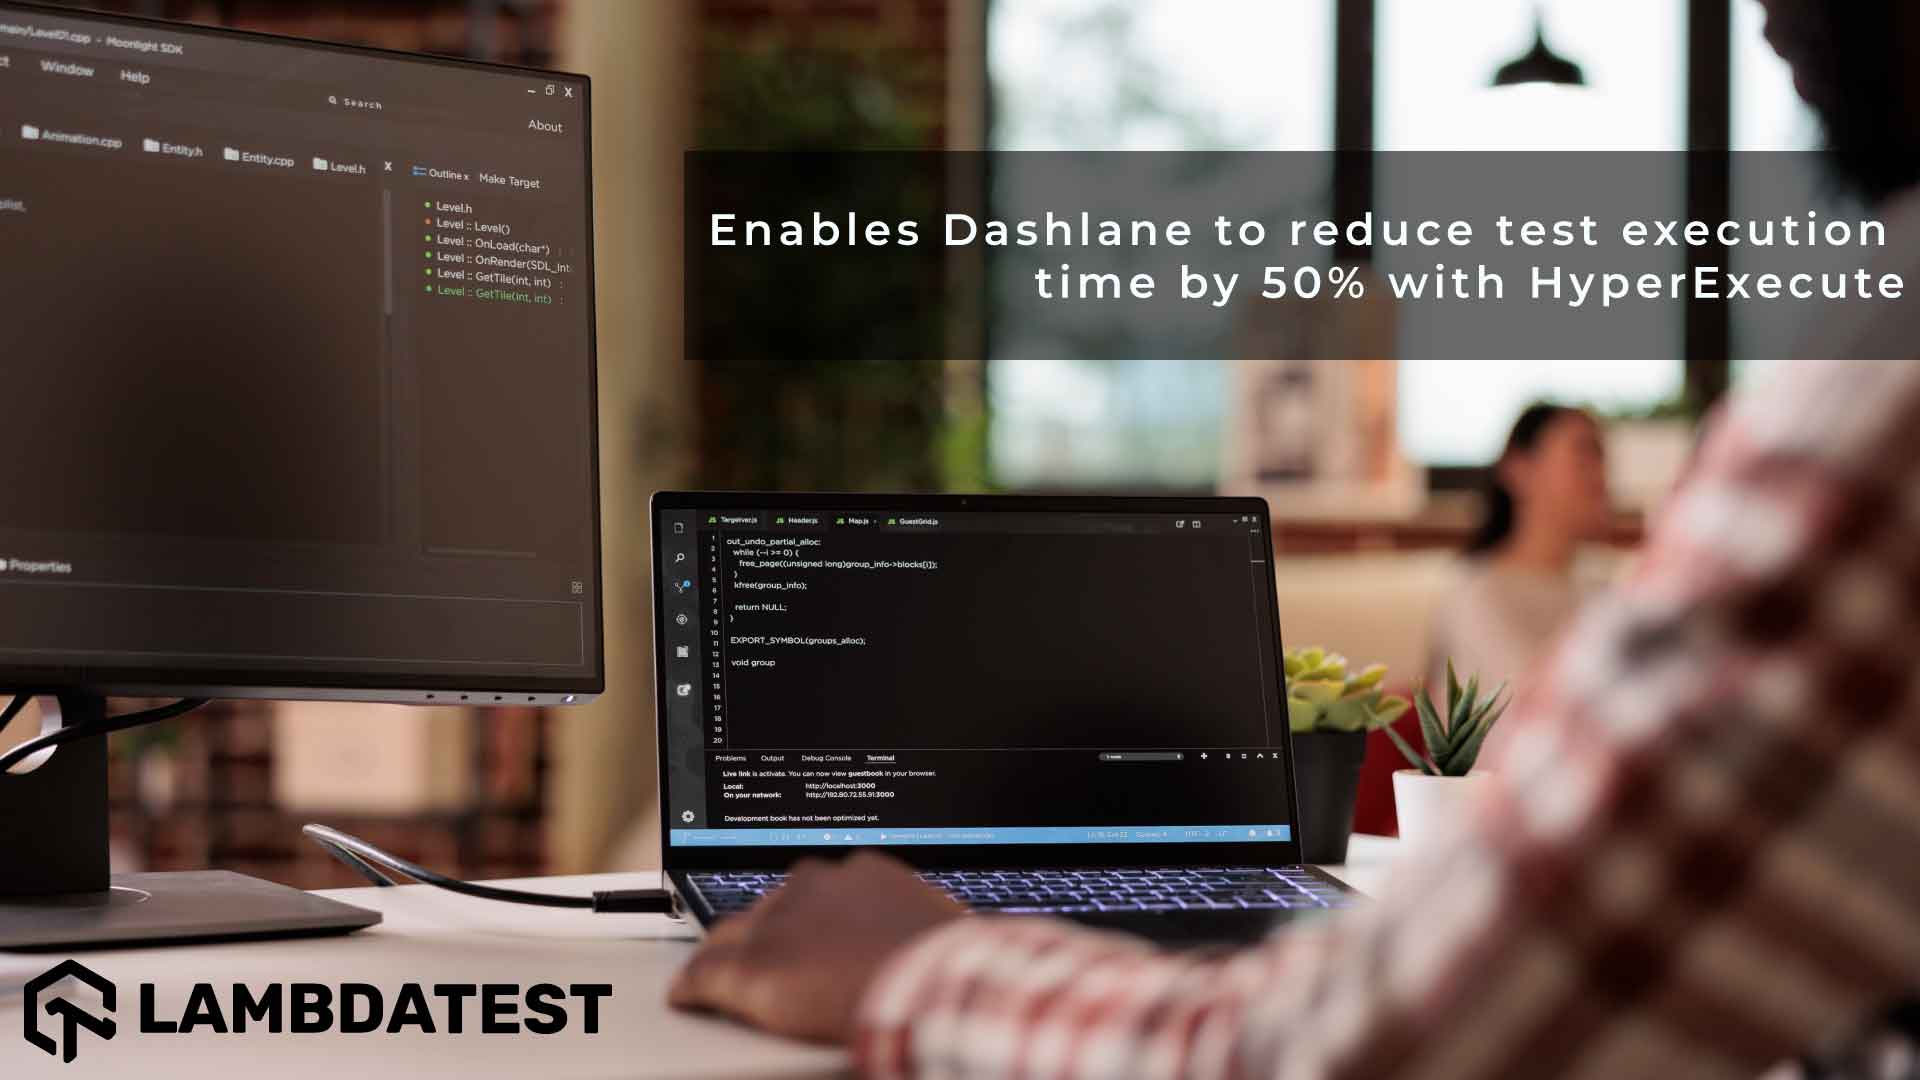 LambdaTest enables Dashlane to reduce test execution time by 50% with HyperExecute